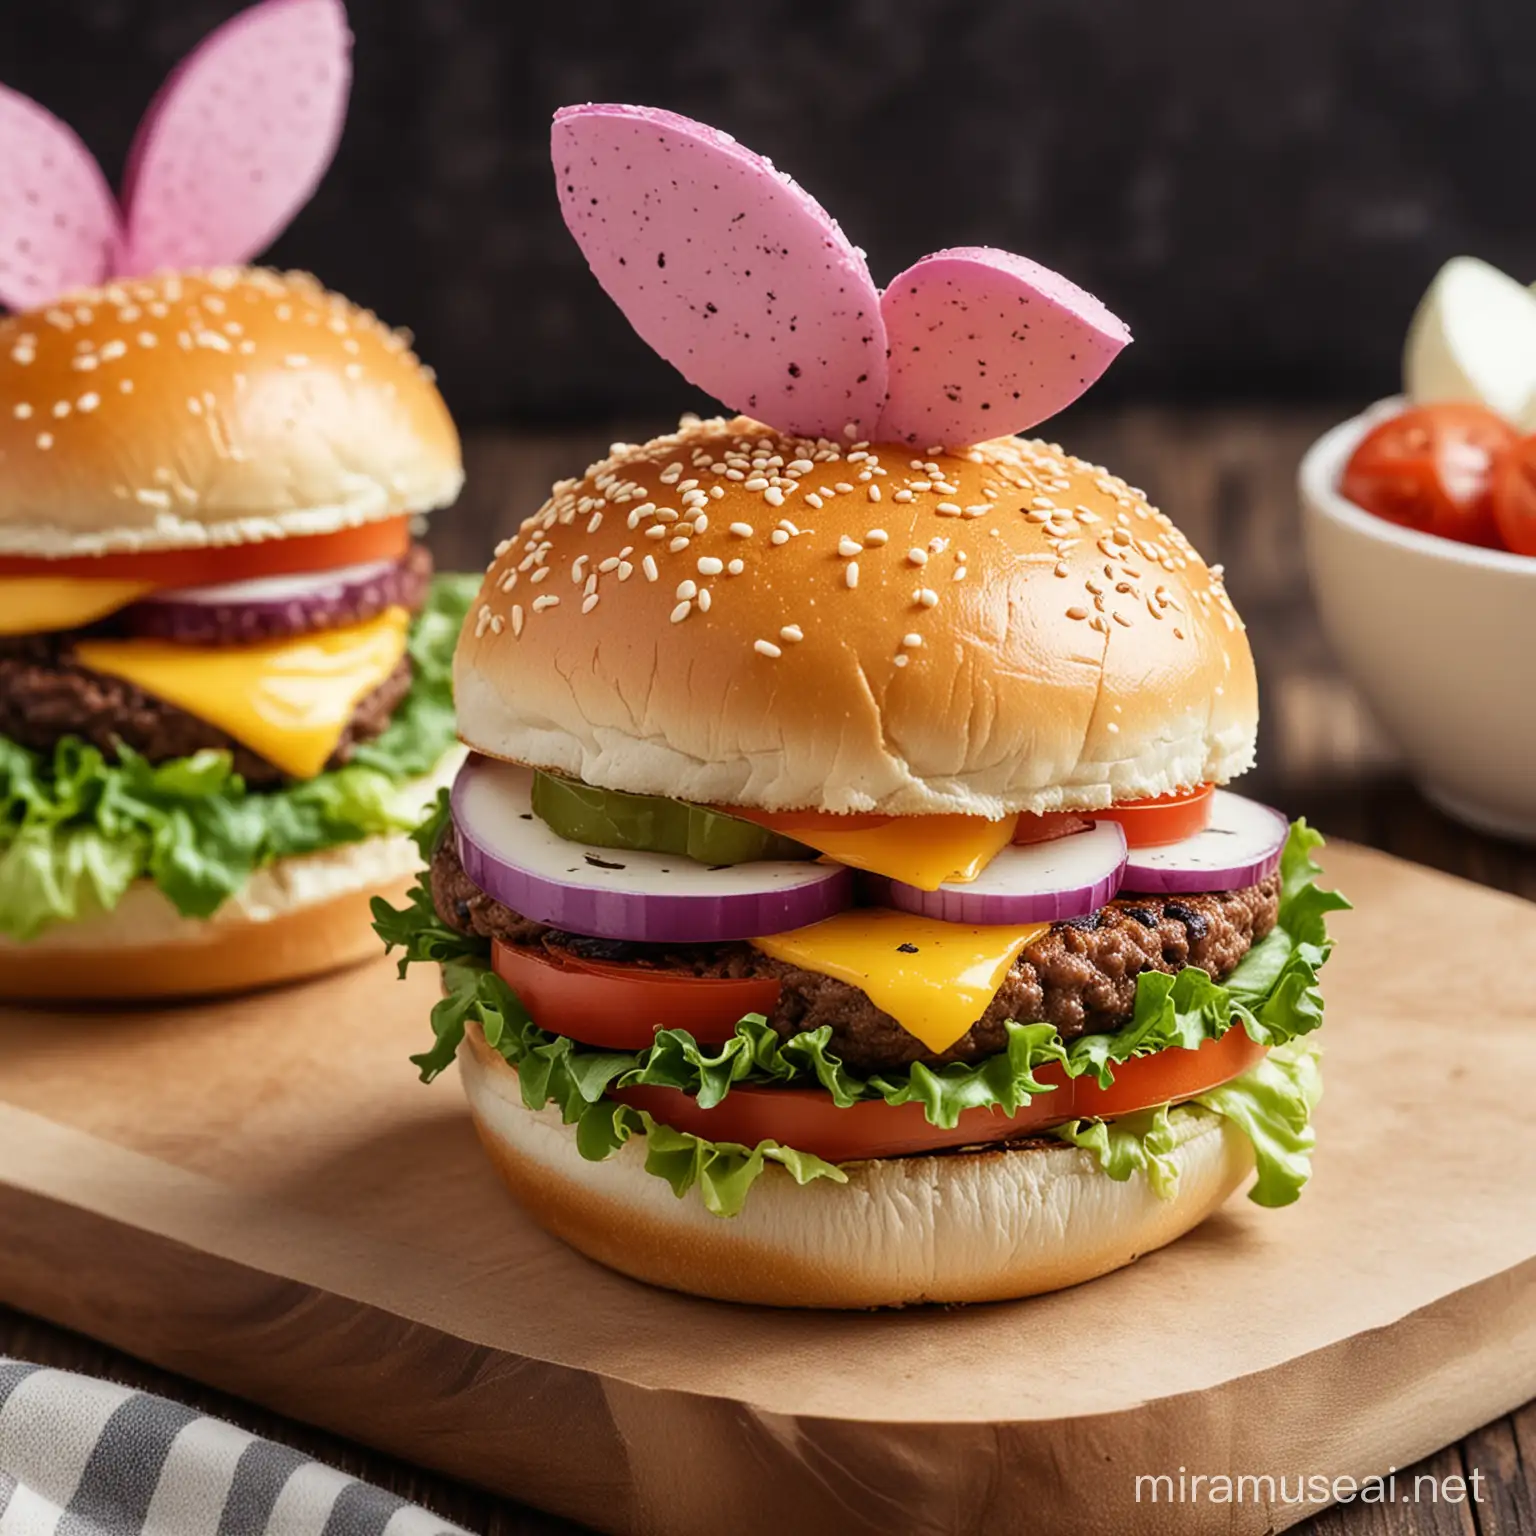 Easter Themed Colorful Veggie Burger with Festive Garnishes